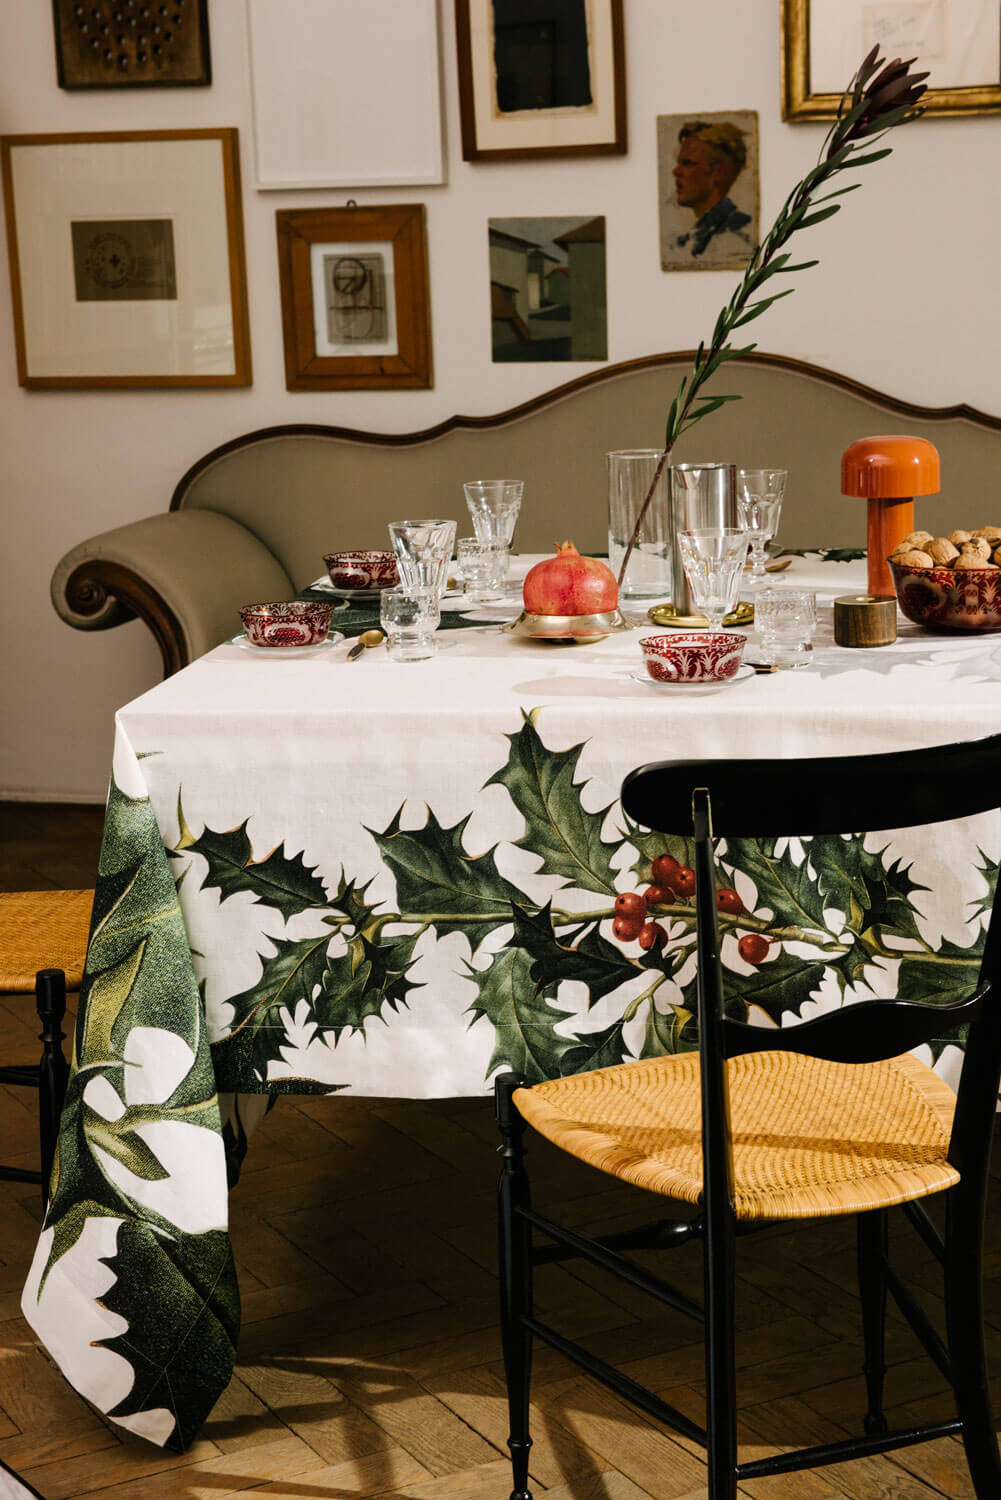 Tablecloth with Holly